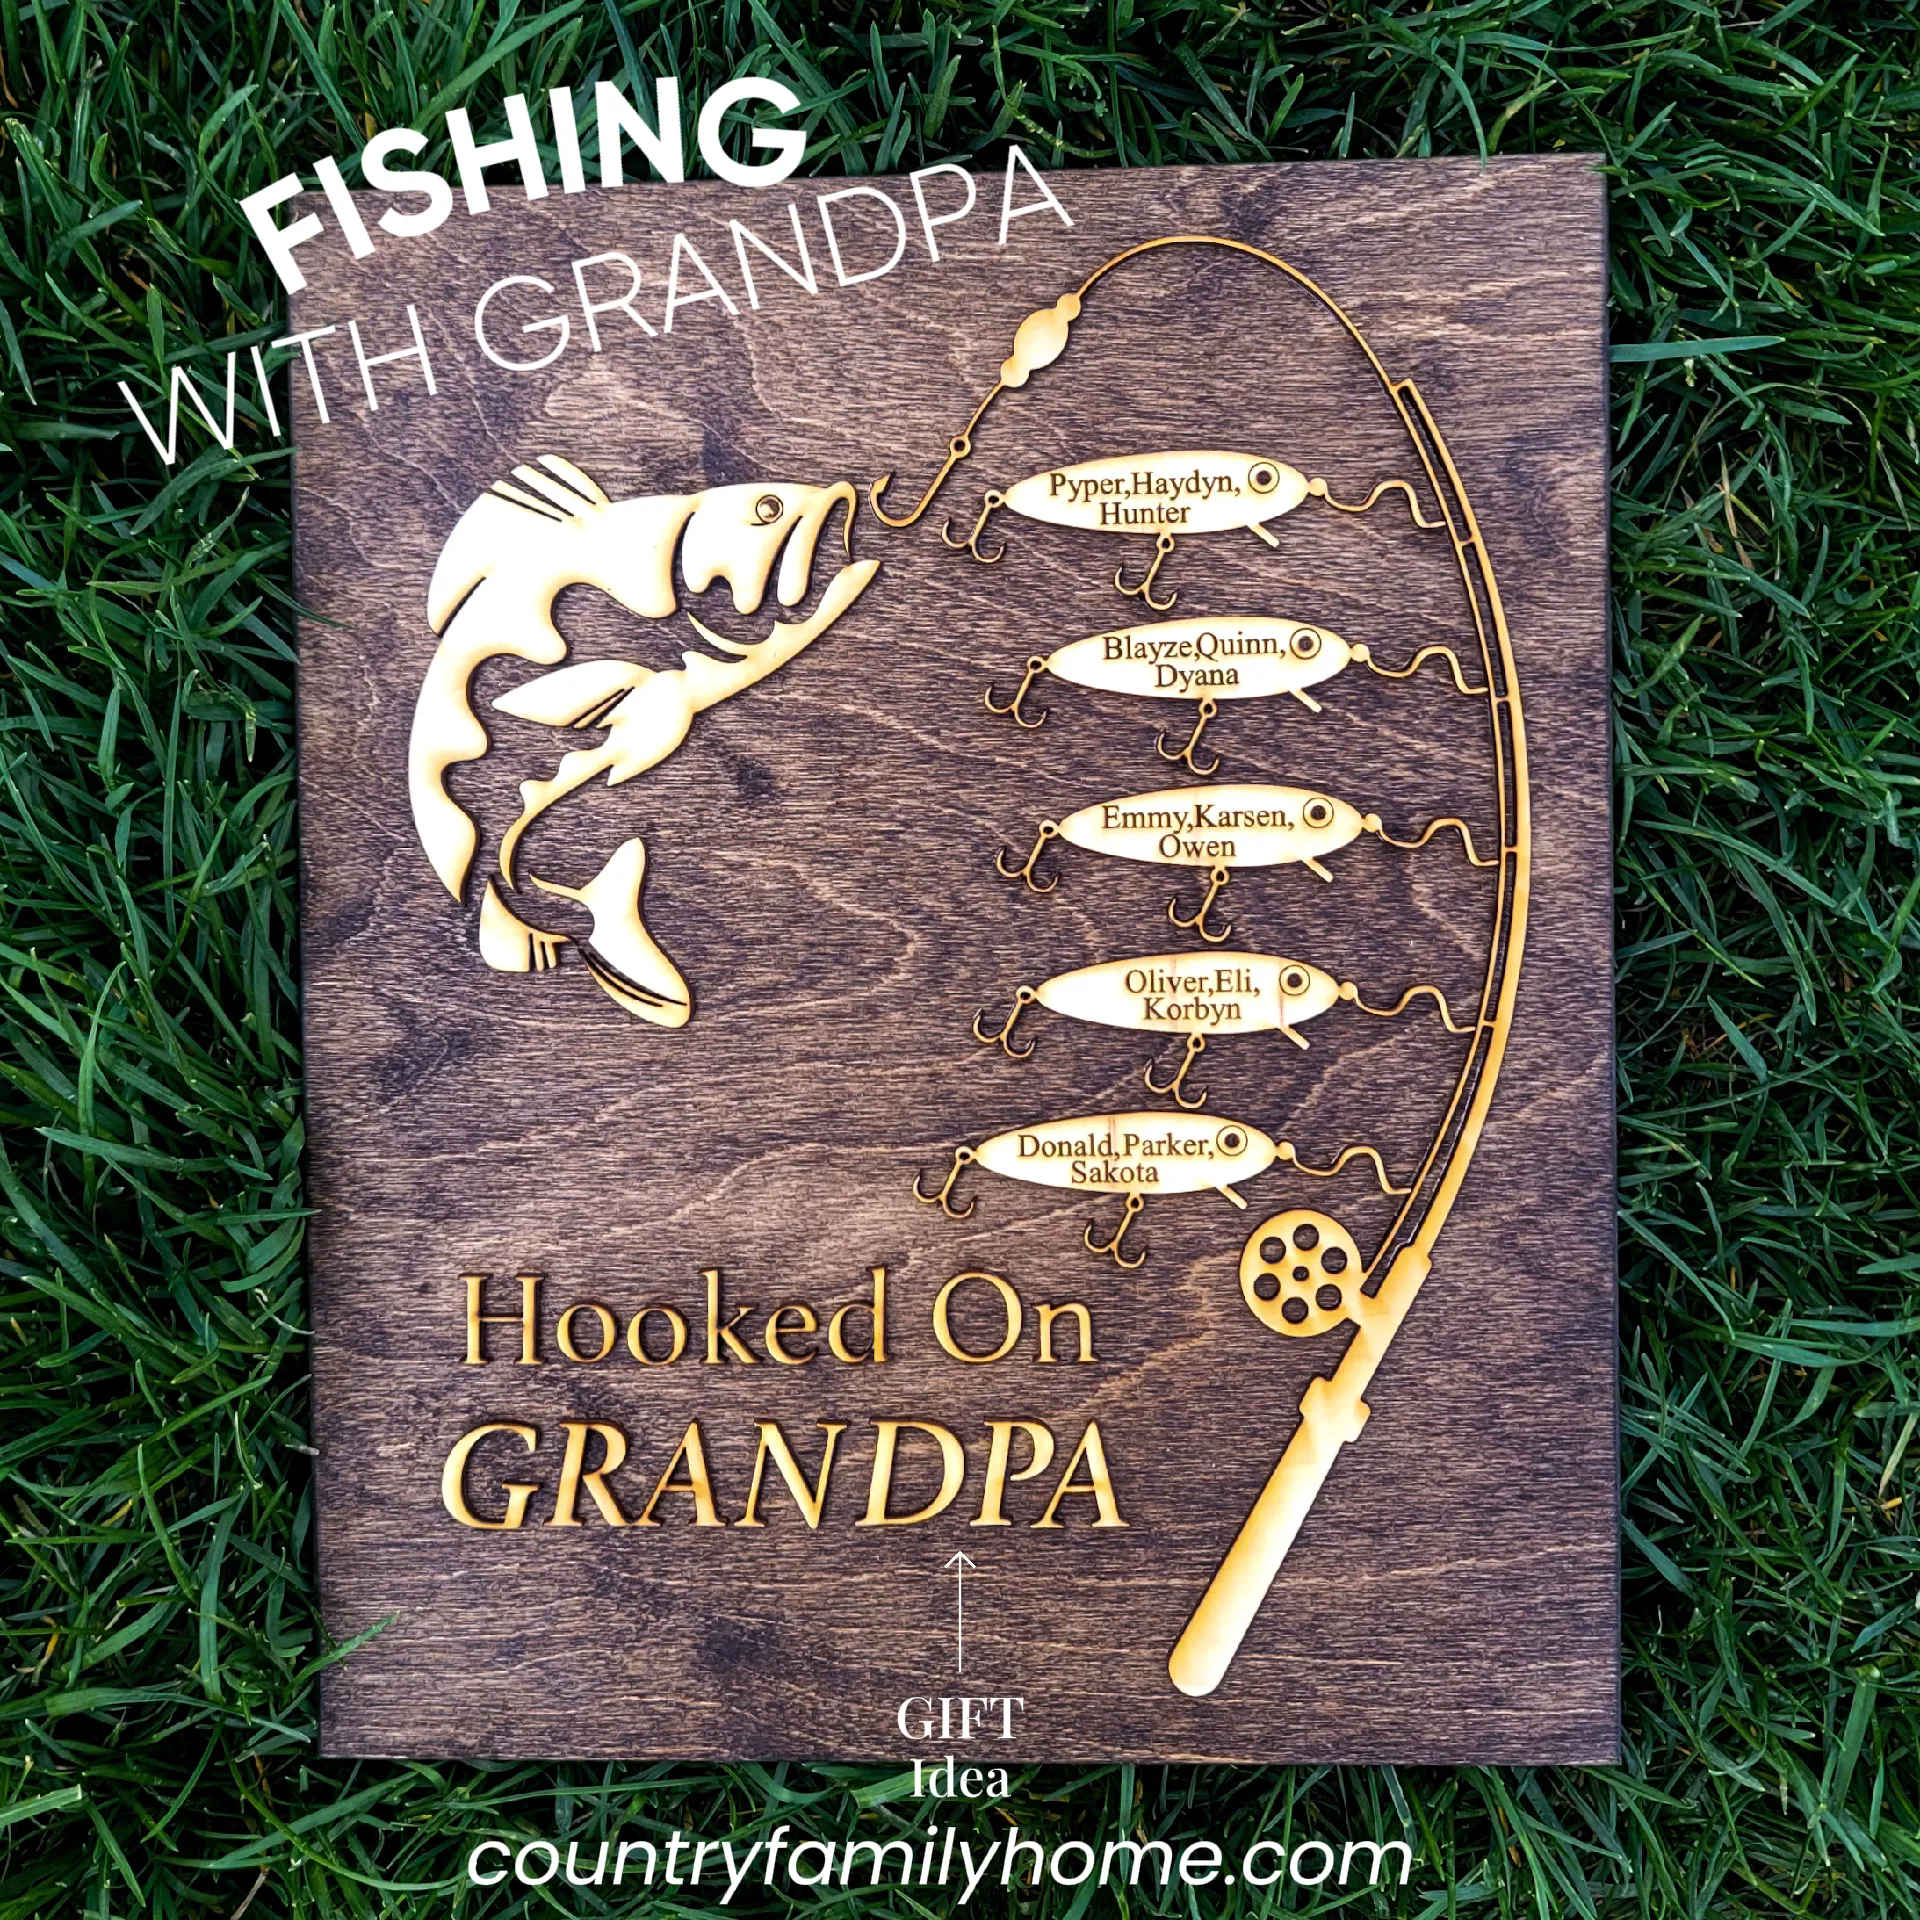 FISHING WITH GRANDPA, Gallery posted by CountryFamily